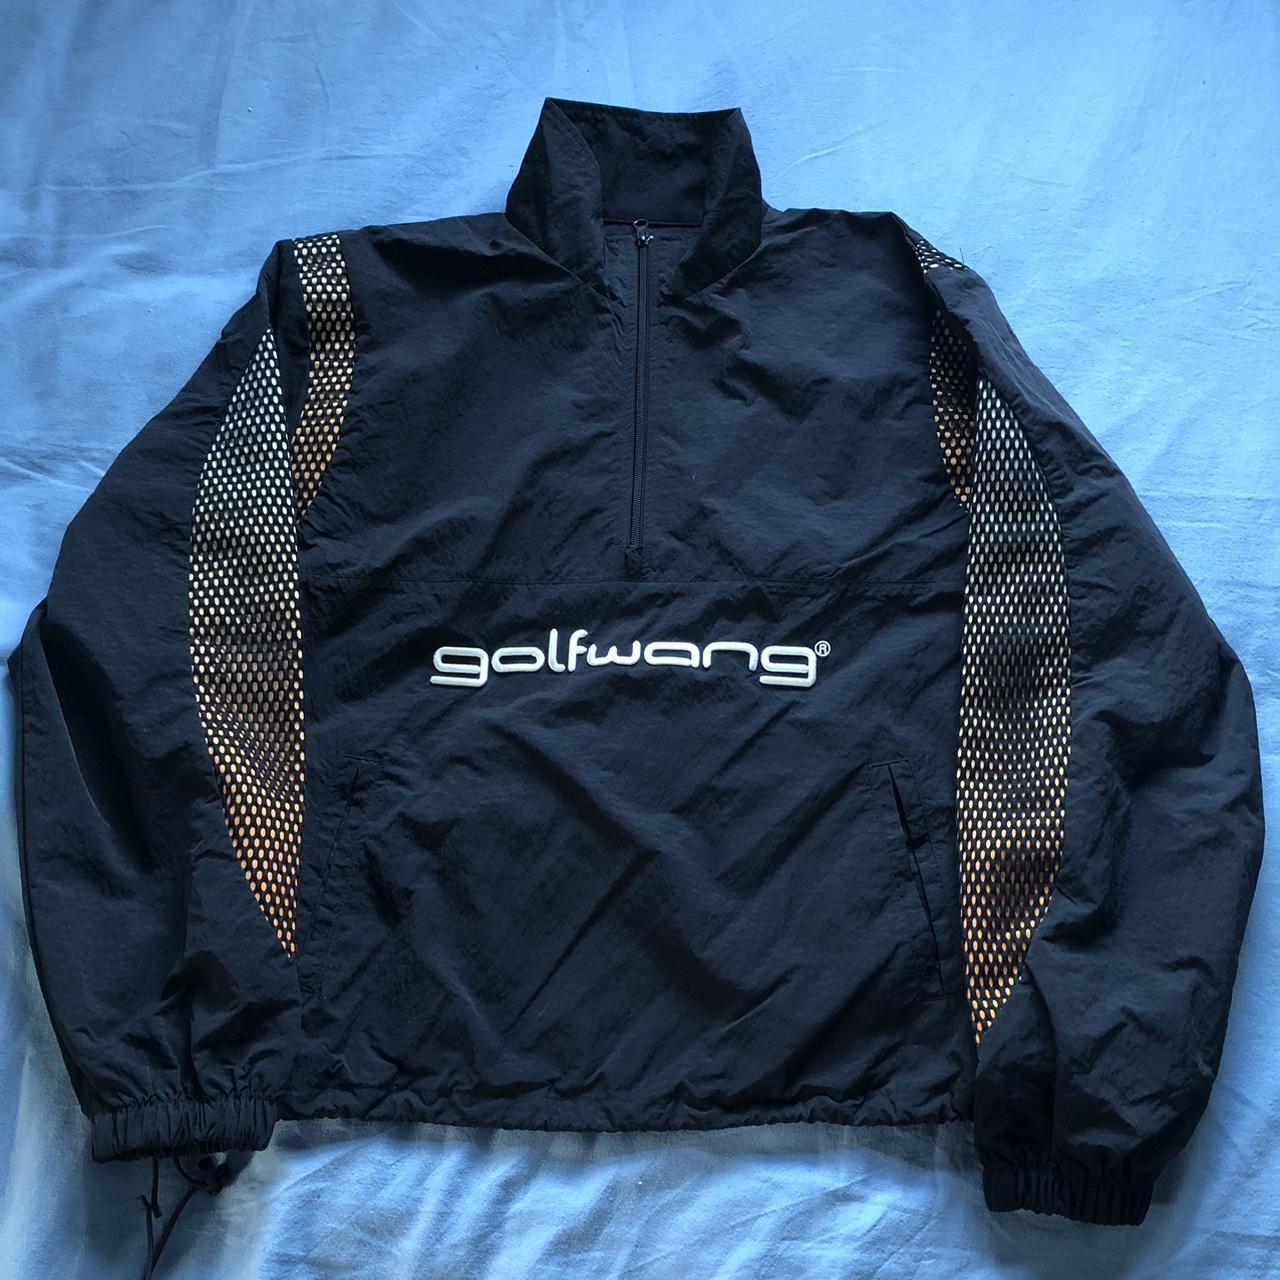 Golf Wang gradient theque jacket Bought from london... - Depop